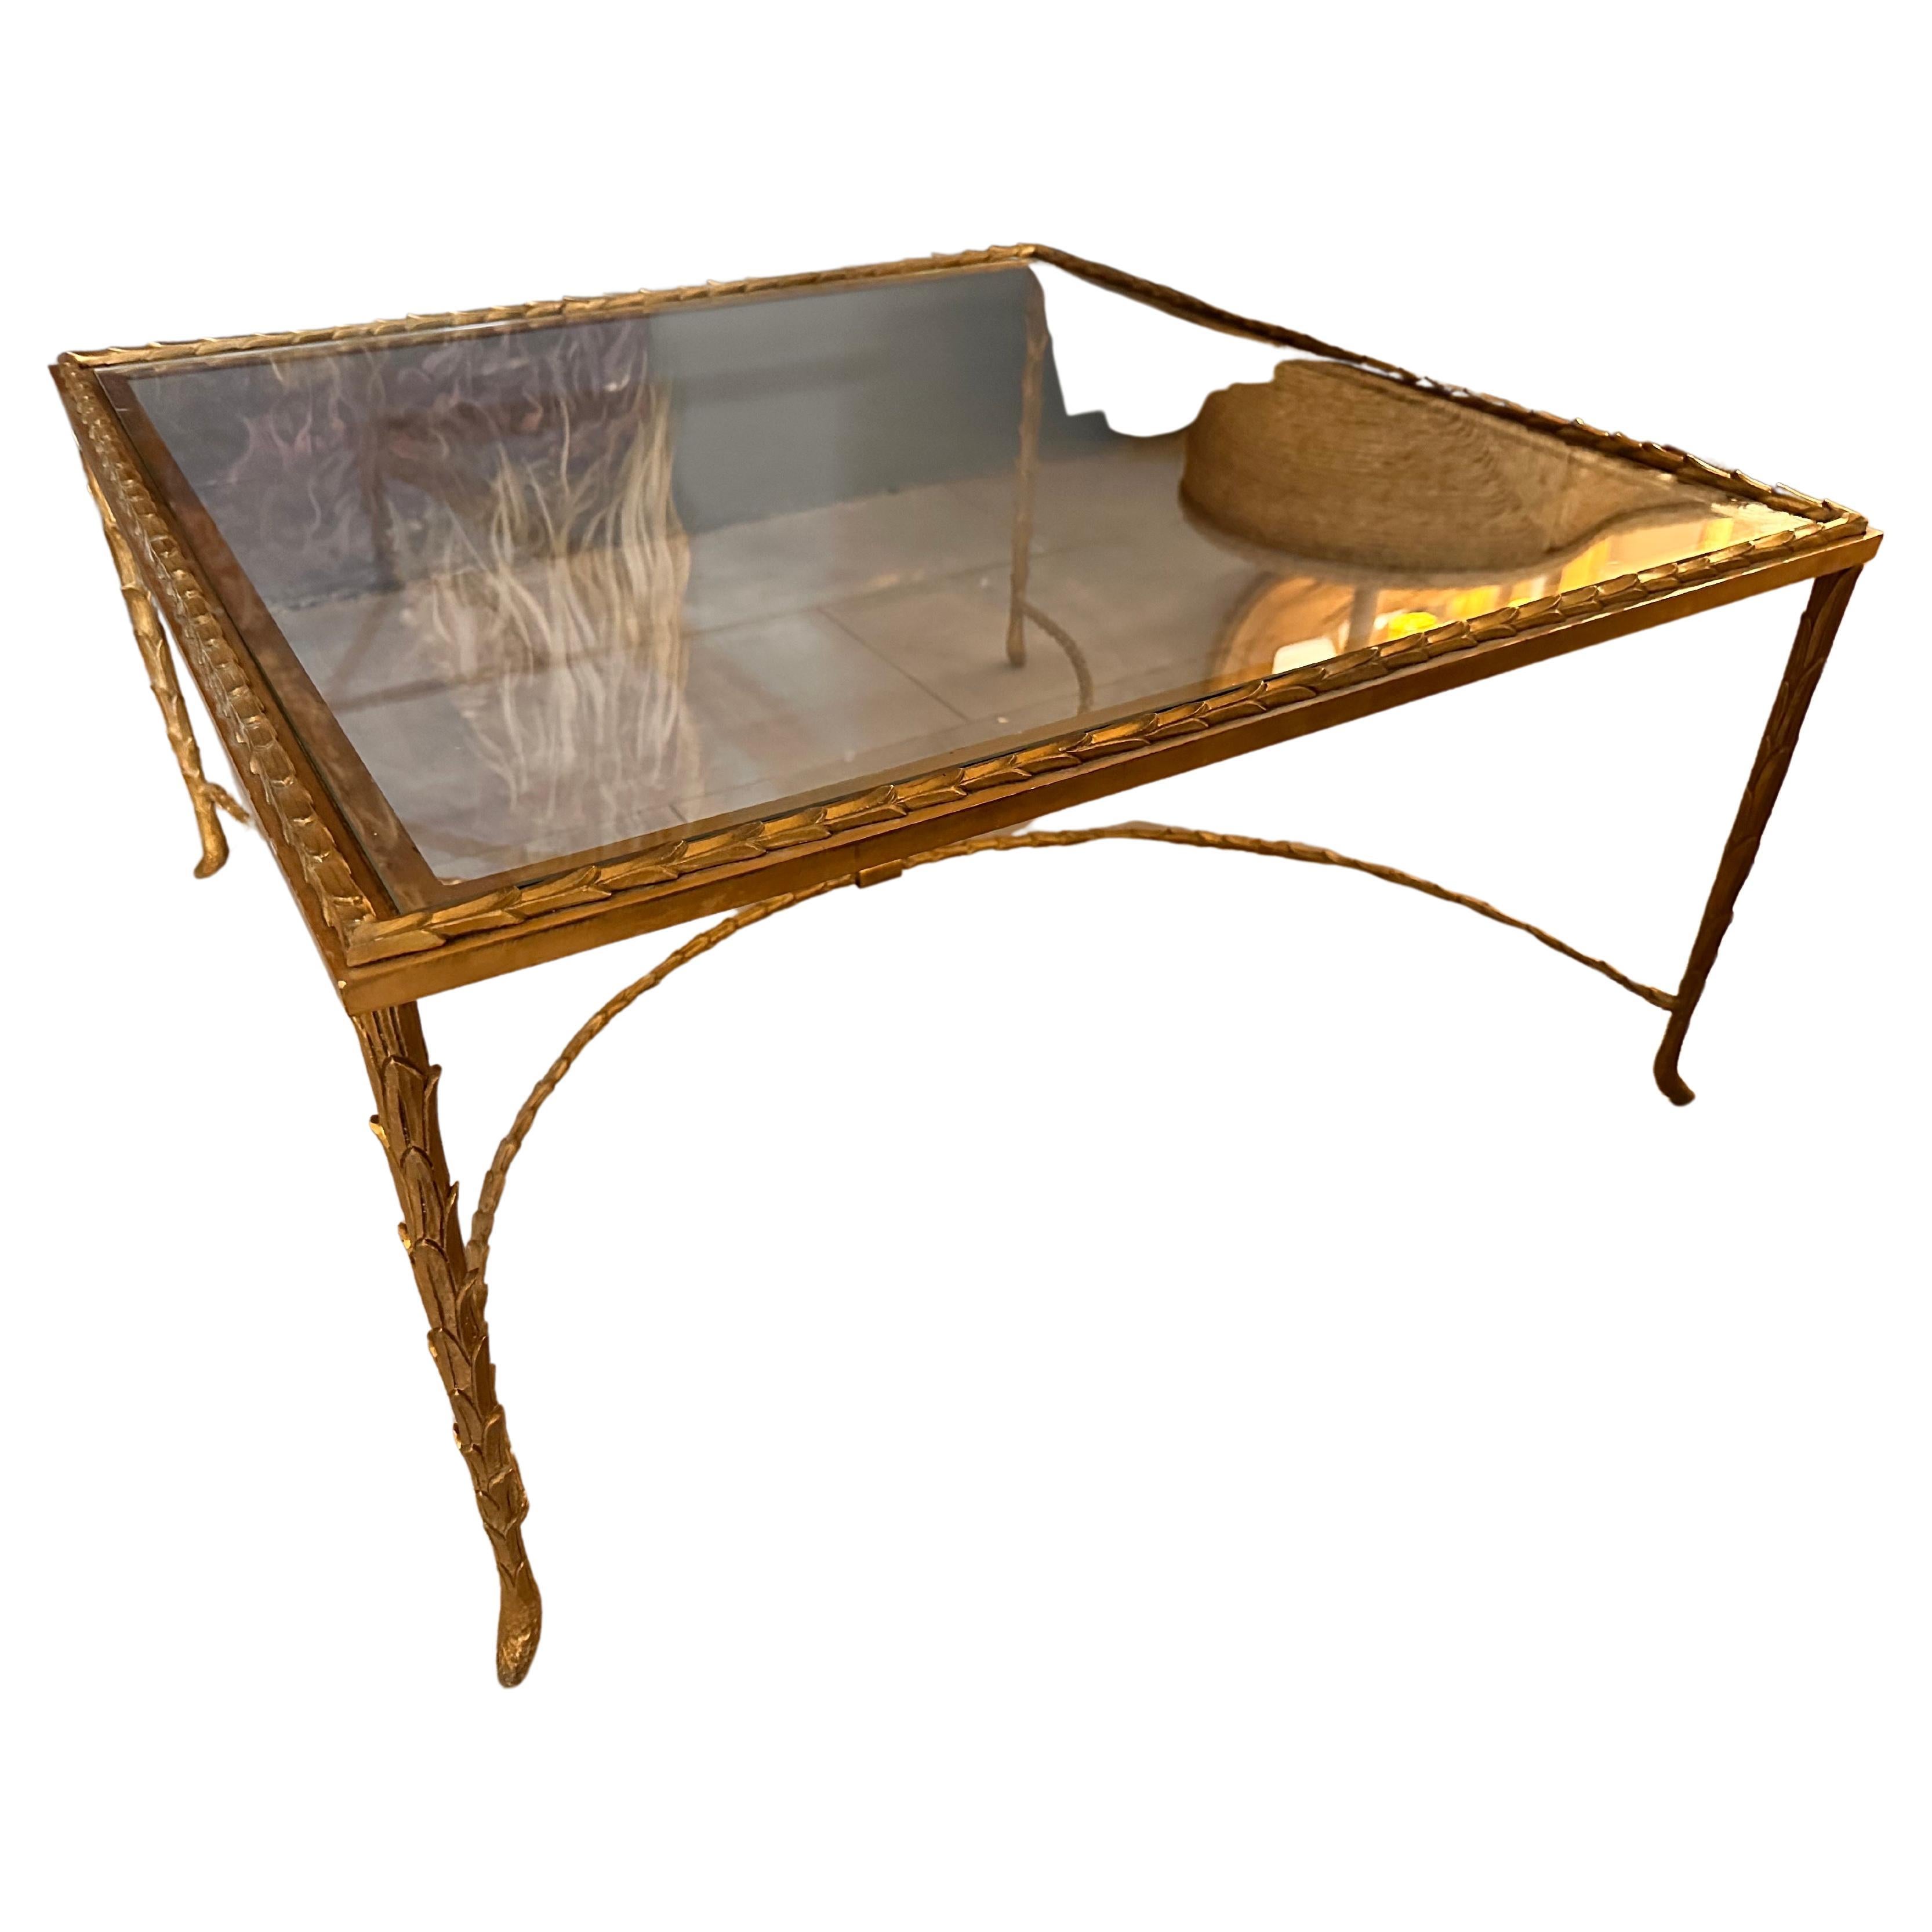 Gilded bronze coffee table by Maison Baguès circa 1970